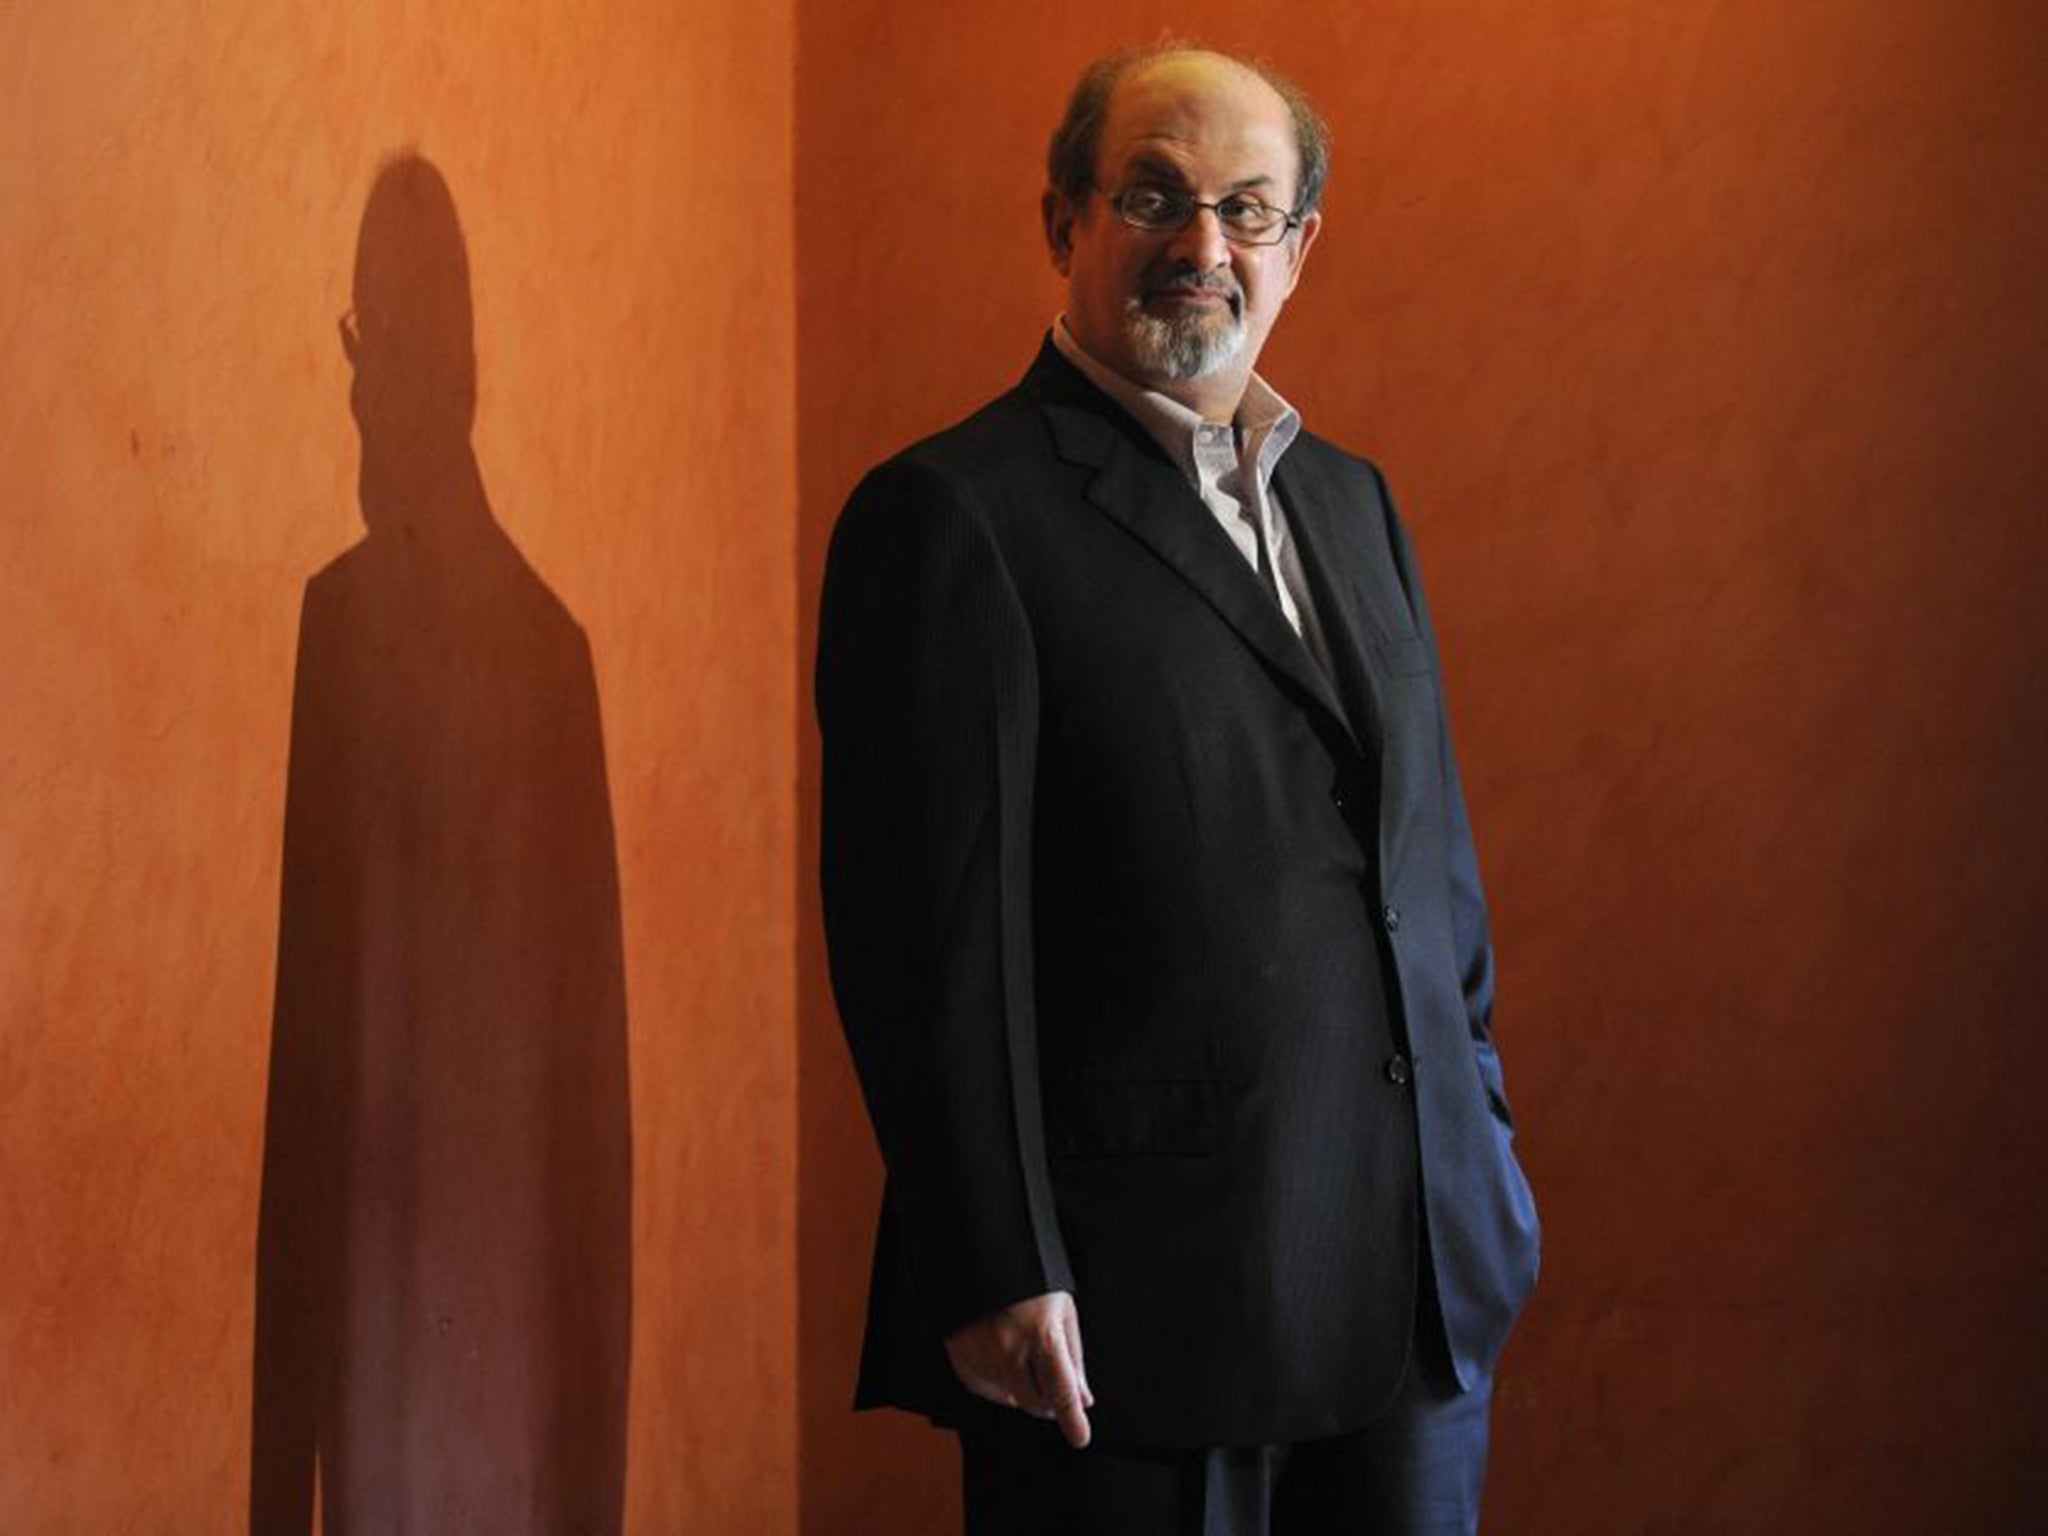 The award-winning Salman Rushdie sparked controversy on the Goodreads website by giving poor ratings to classic novels 